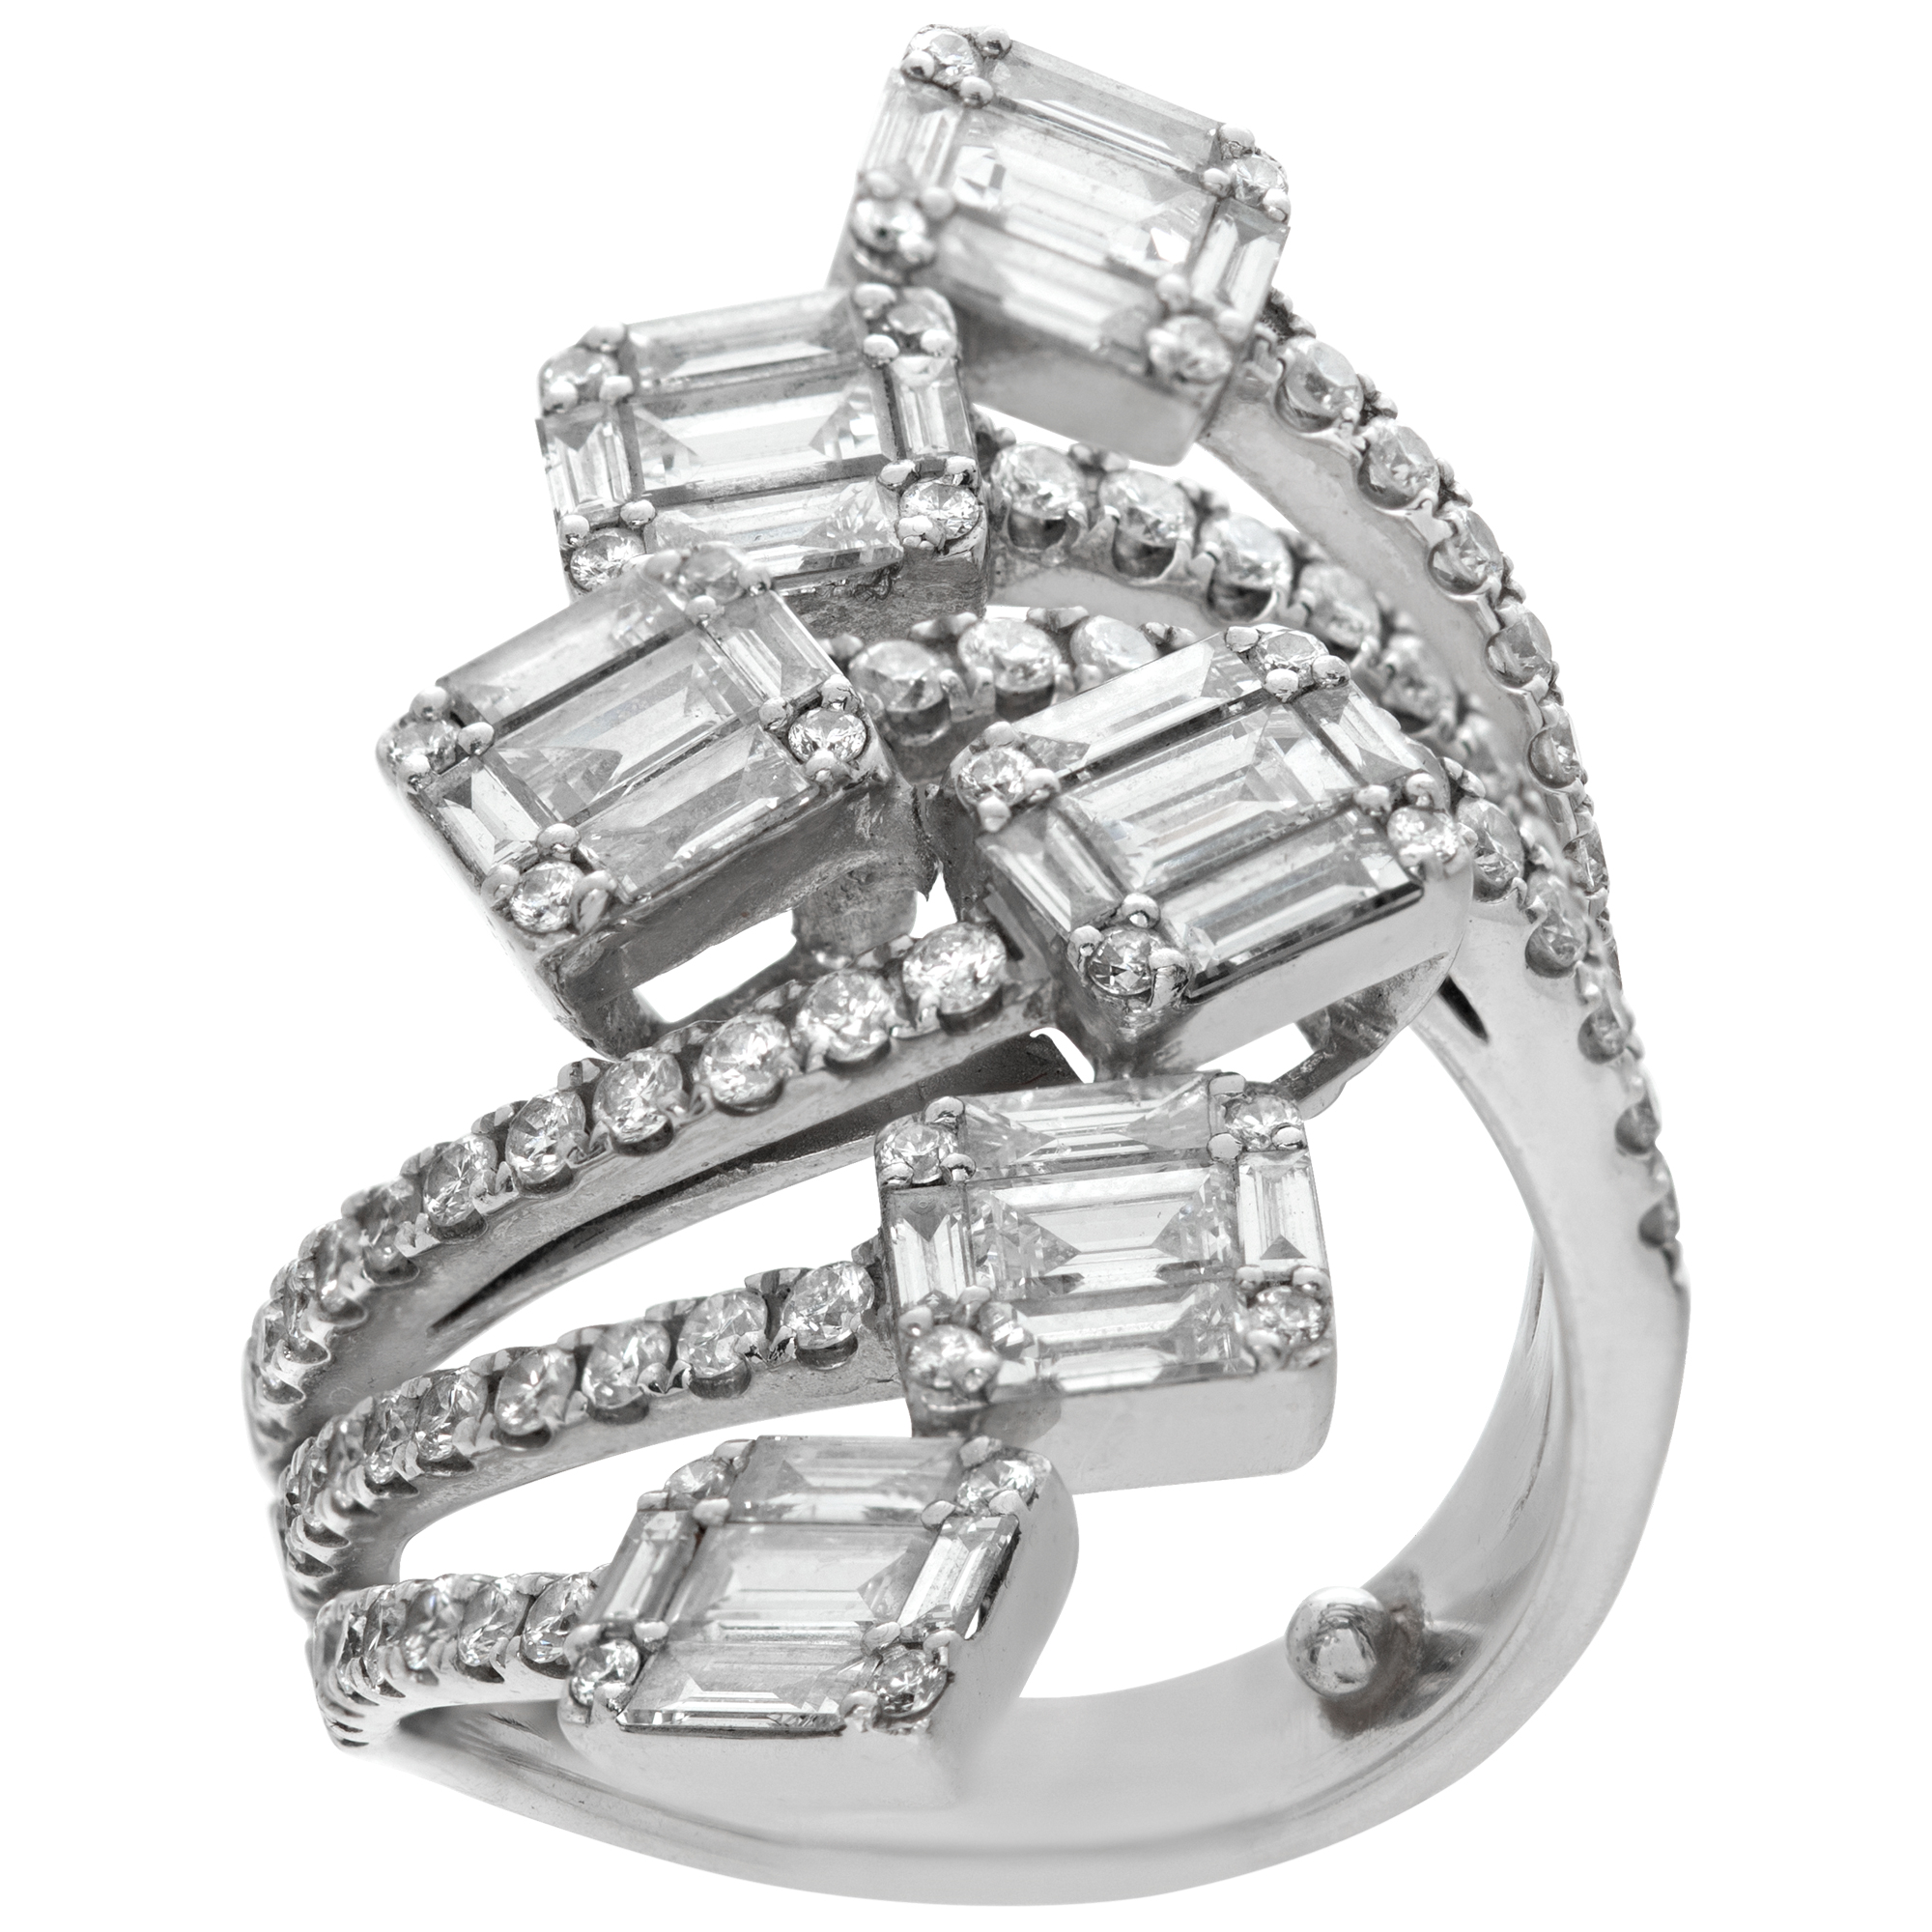 "Illusion" baguettes and round brilliant diamonds cut ring in 18k white gold